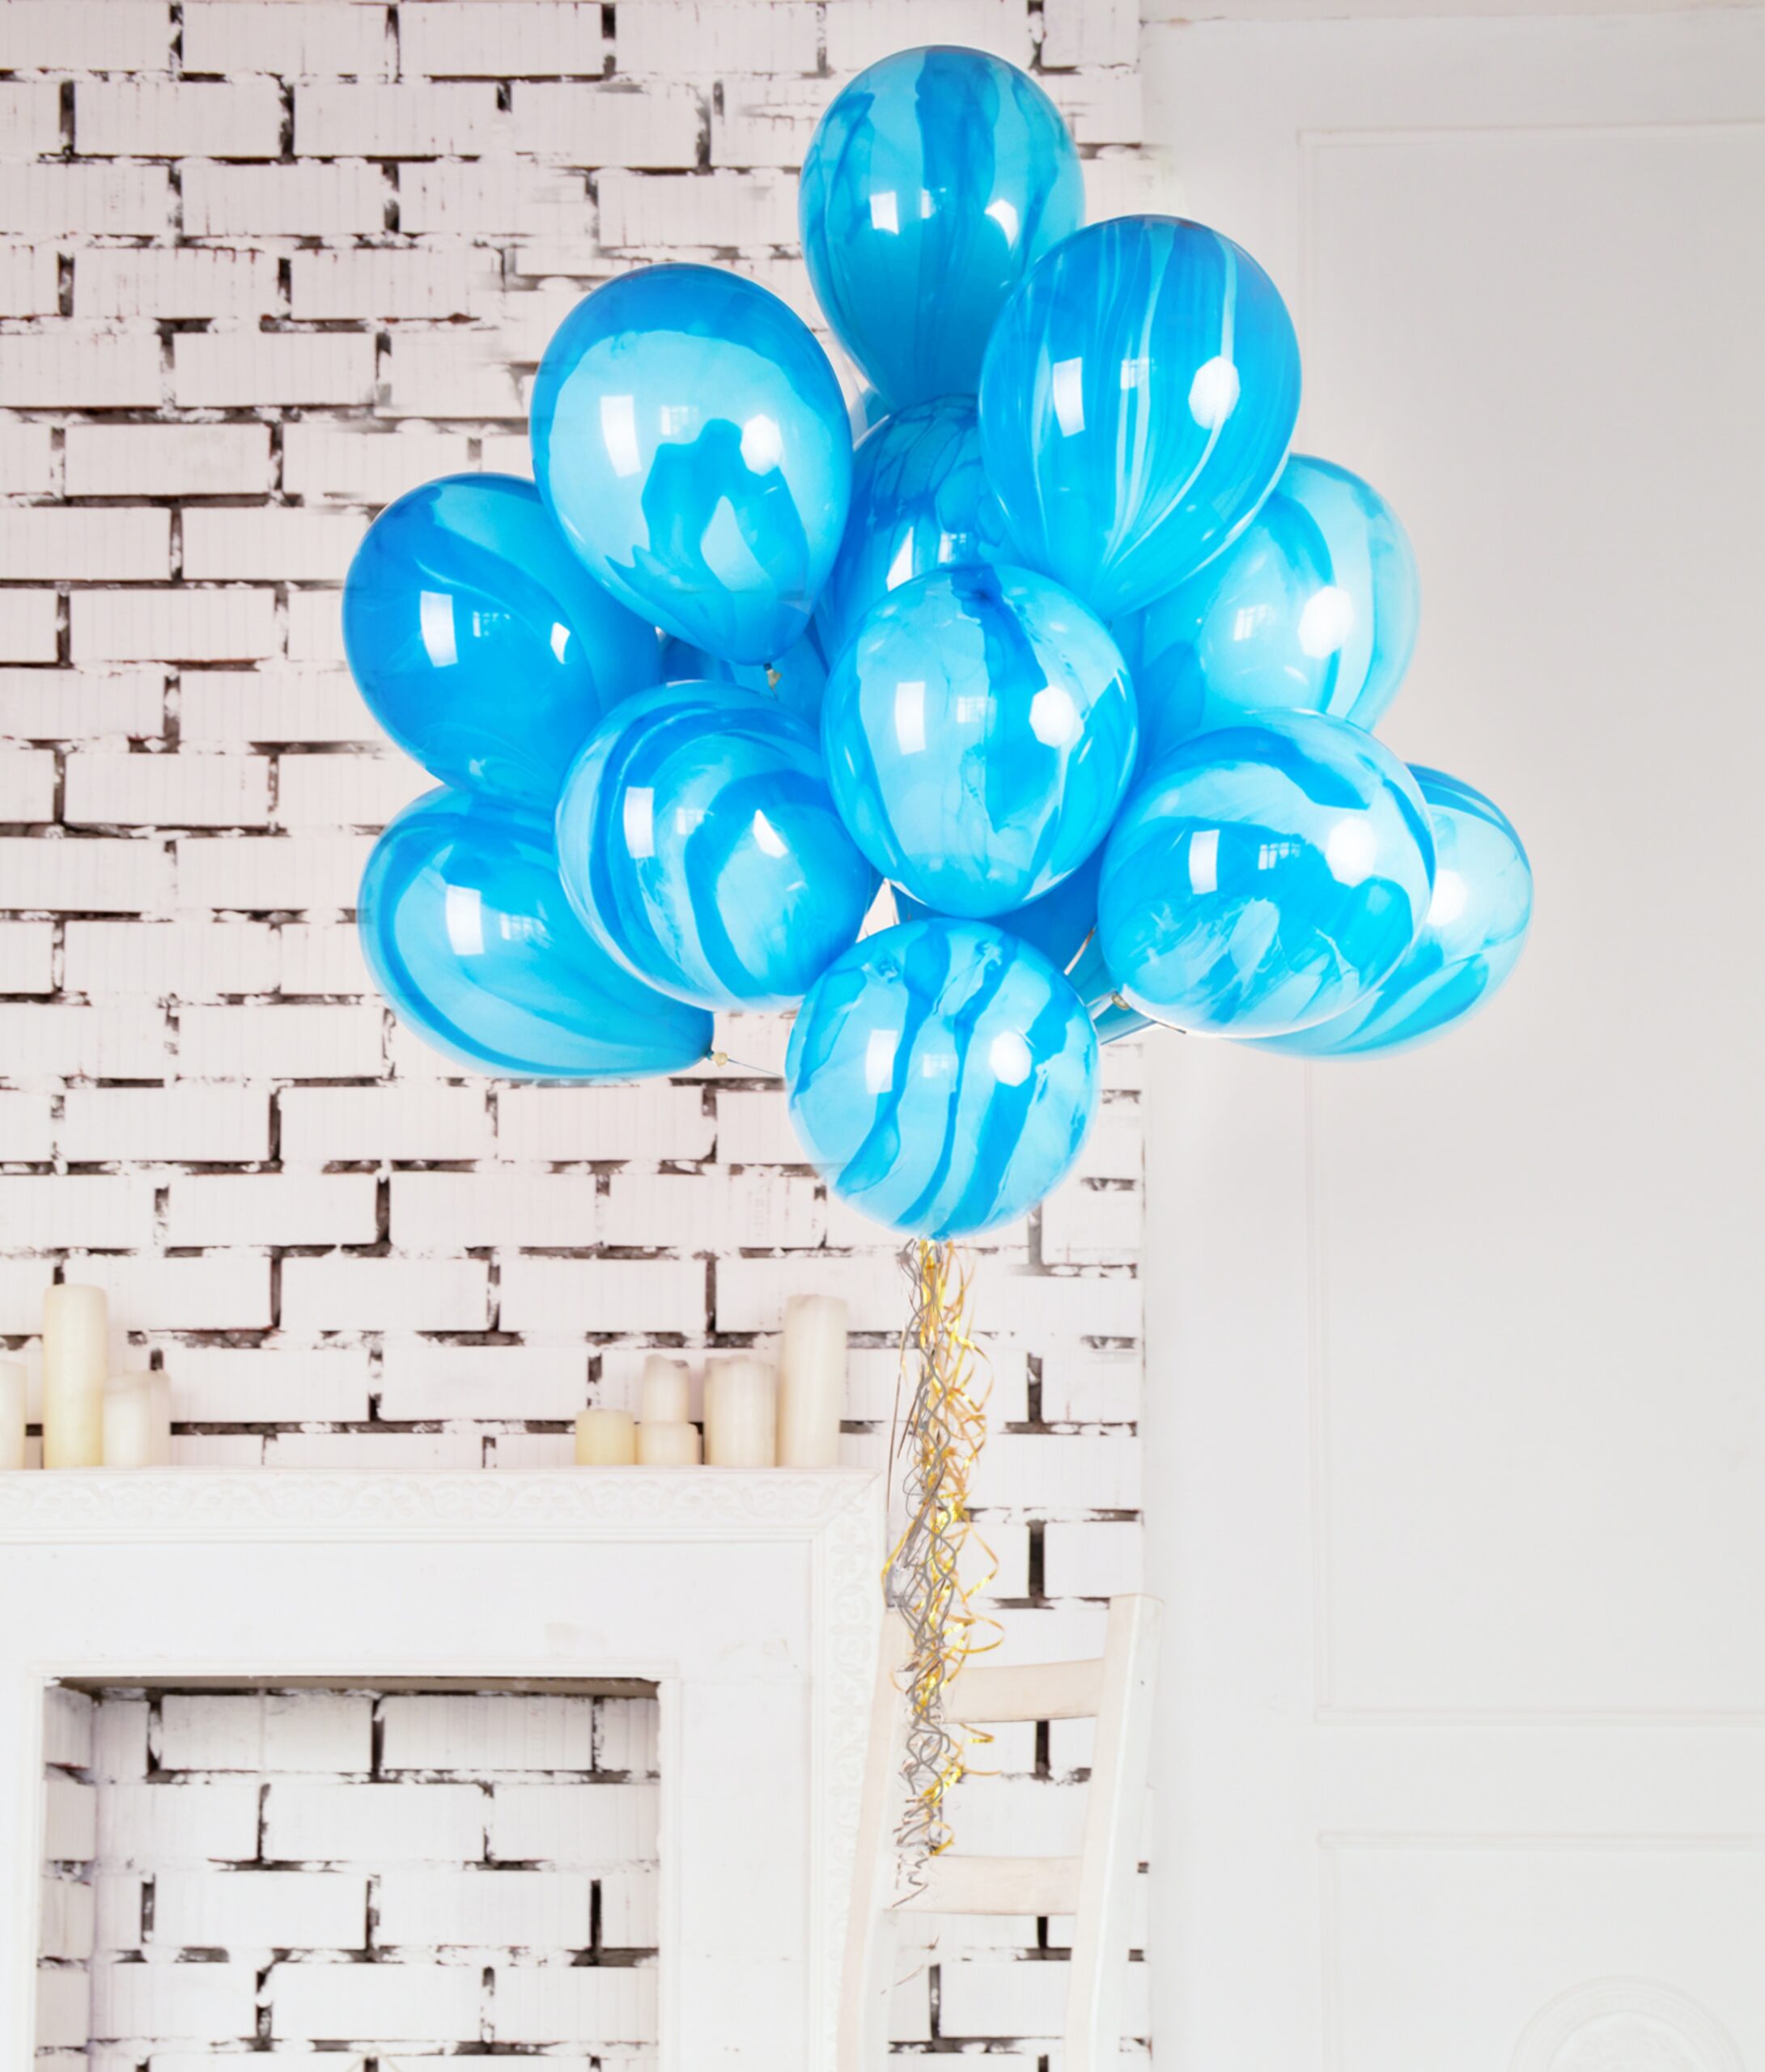 Blue balloons against a white brick background